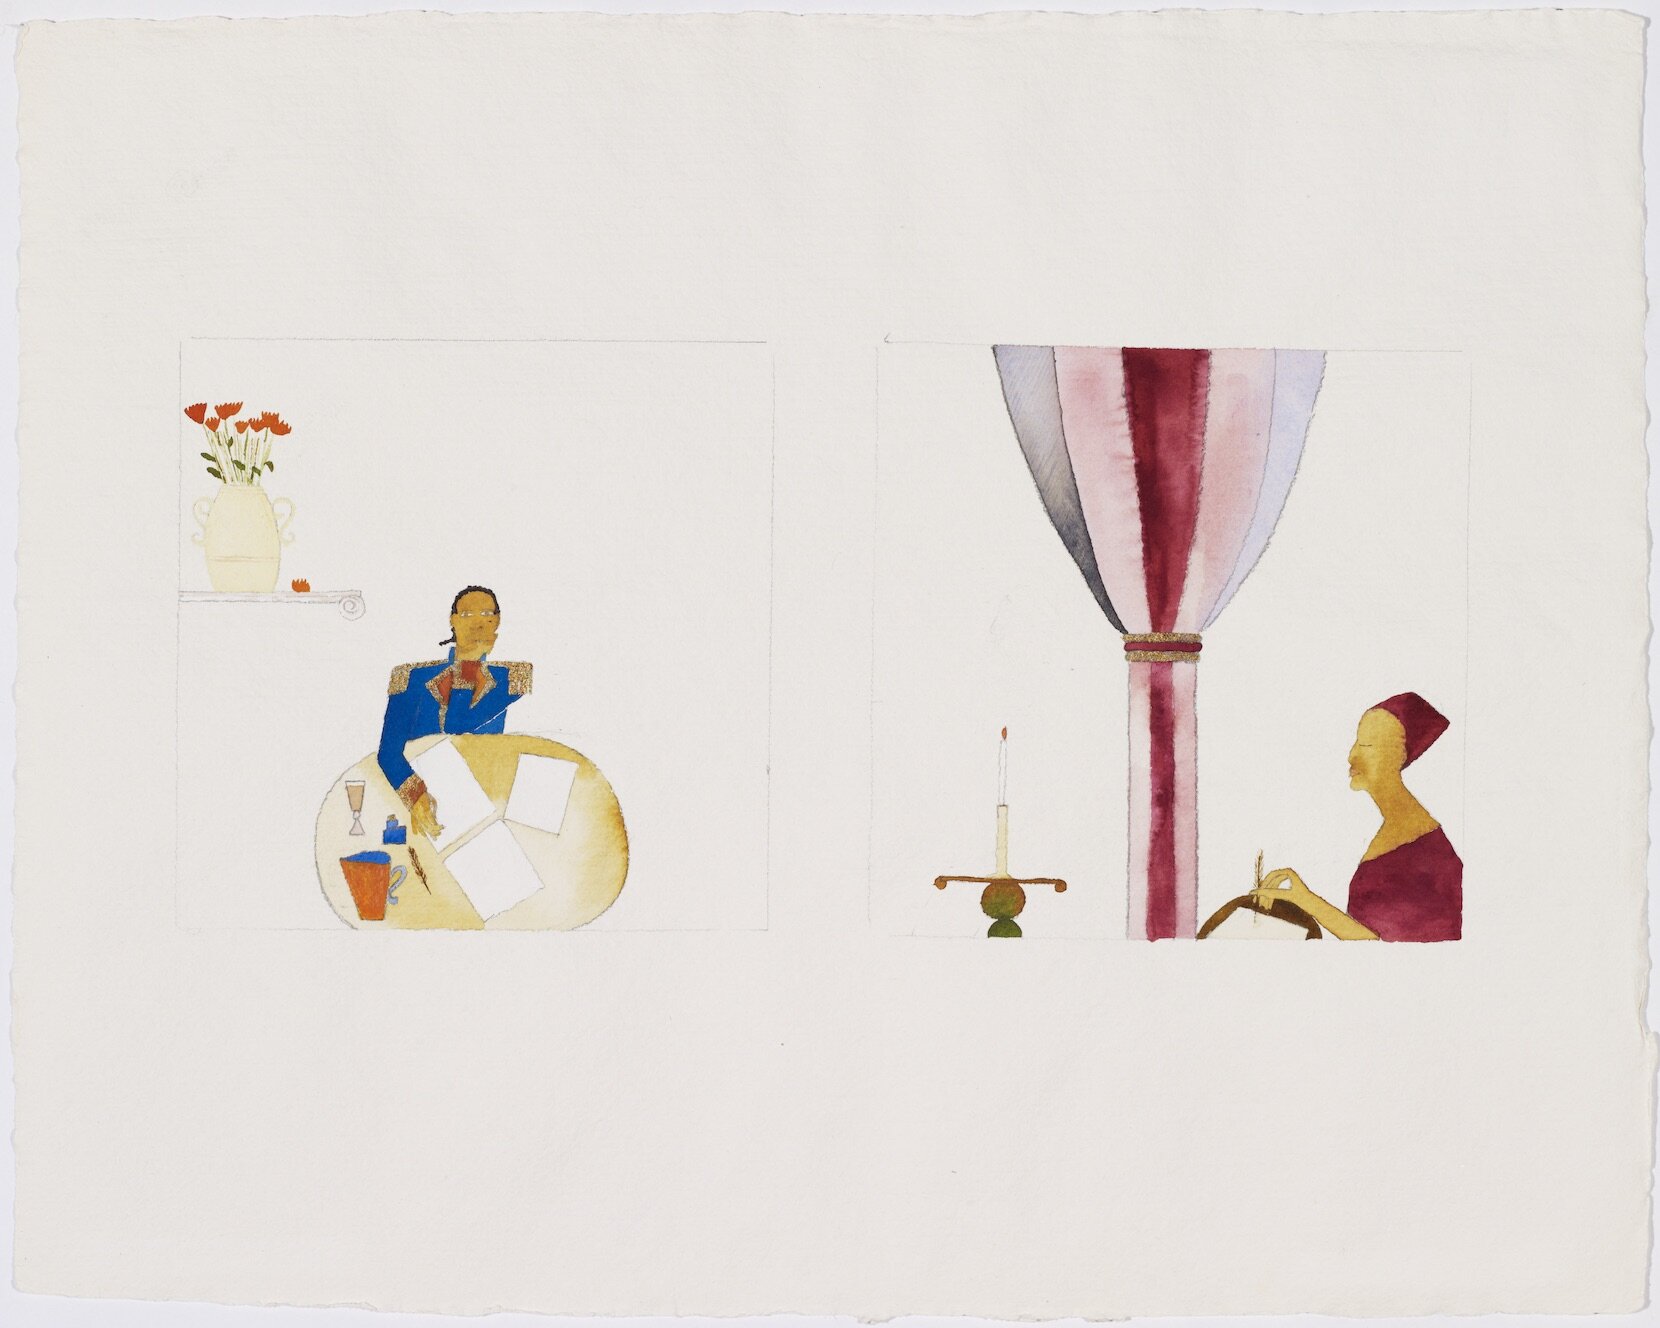 Lubaina Himid, Scenes from the Life of Toussaint L'Ouverture: 7 (1987), watercolour and pencil on paper, 39.5 x 50 cm. Arts Council Collection, Southbank Centre, London © Lubaina Himid.